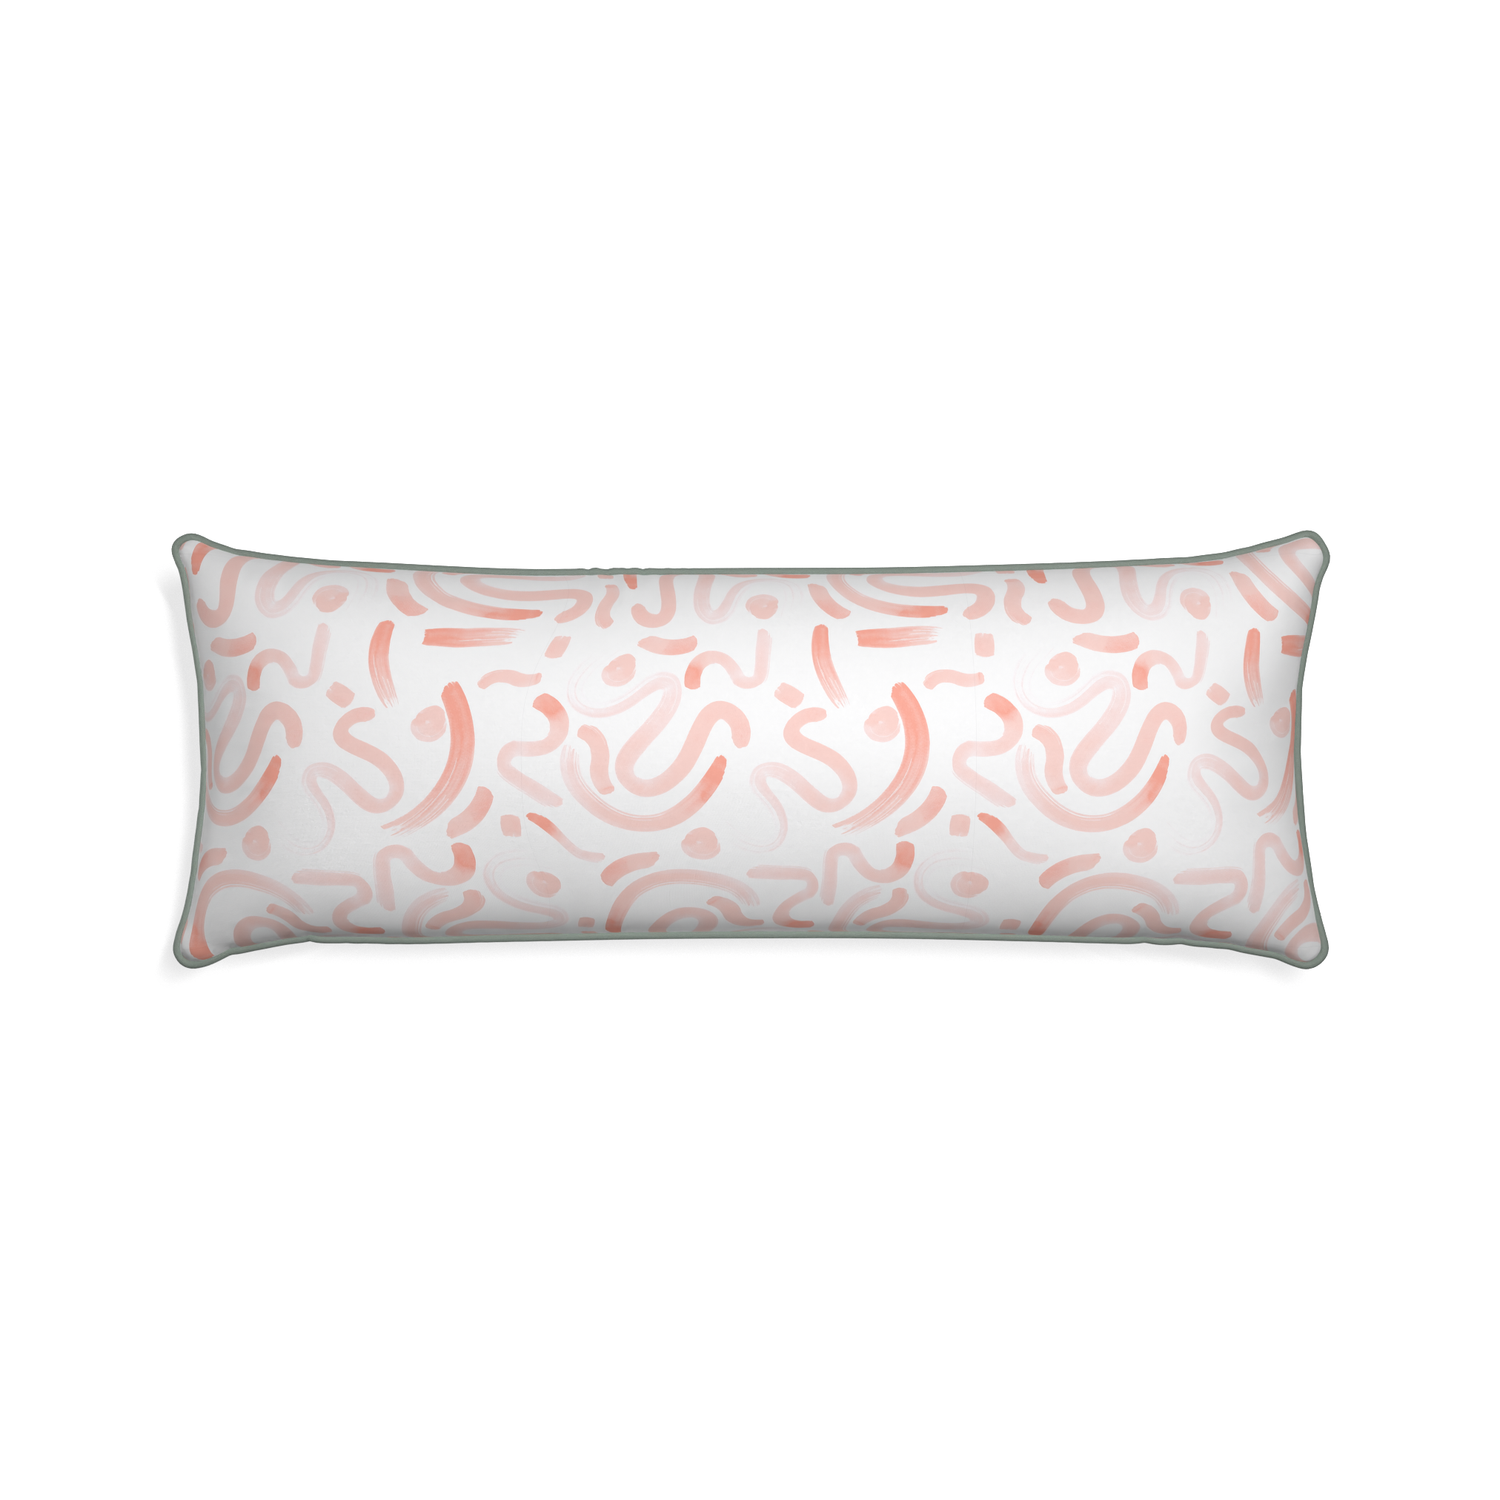 Xl-lumbar hockney pink custom pink graphicpillow with sage piping on white background